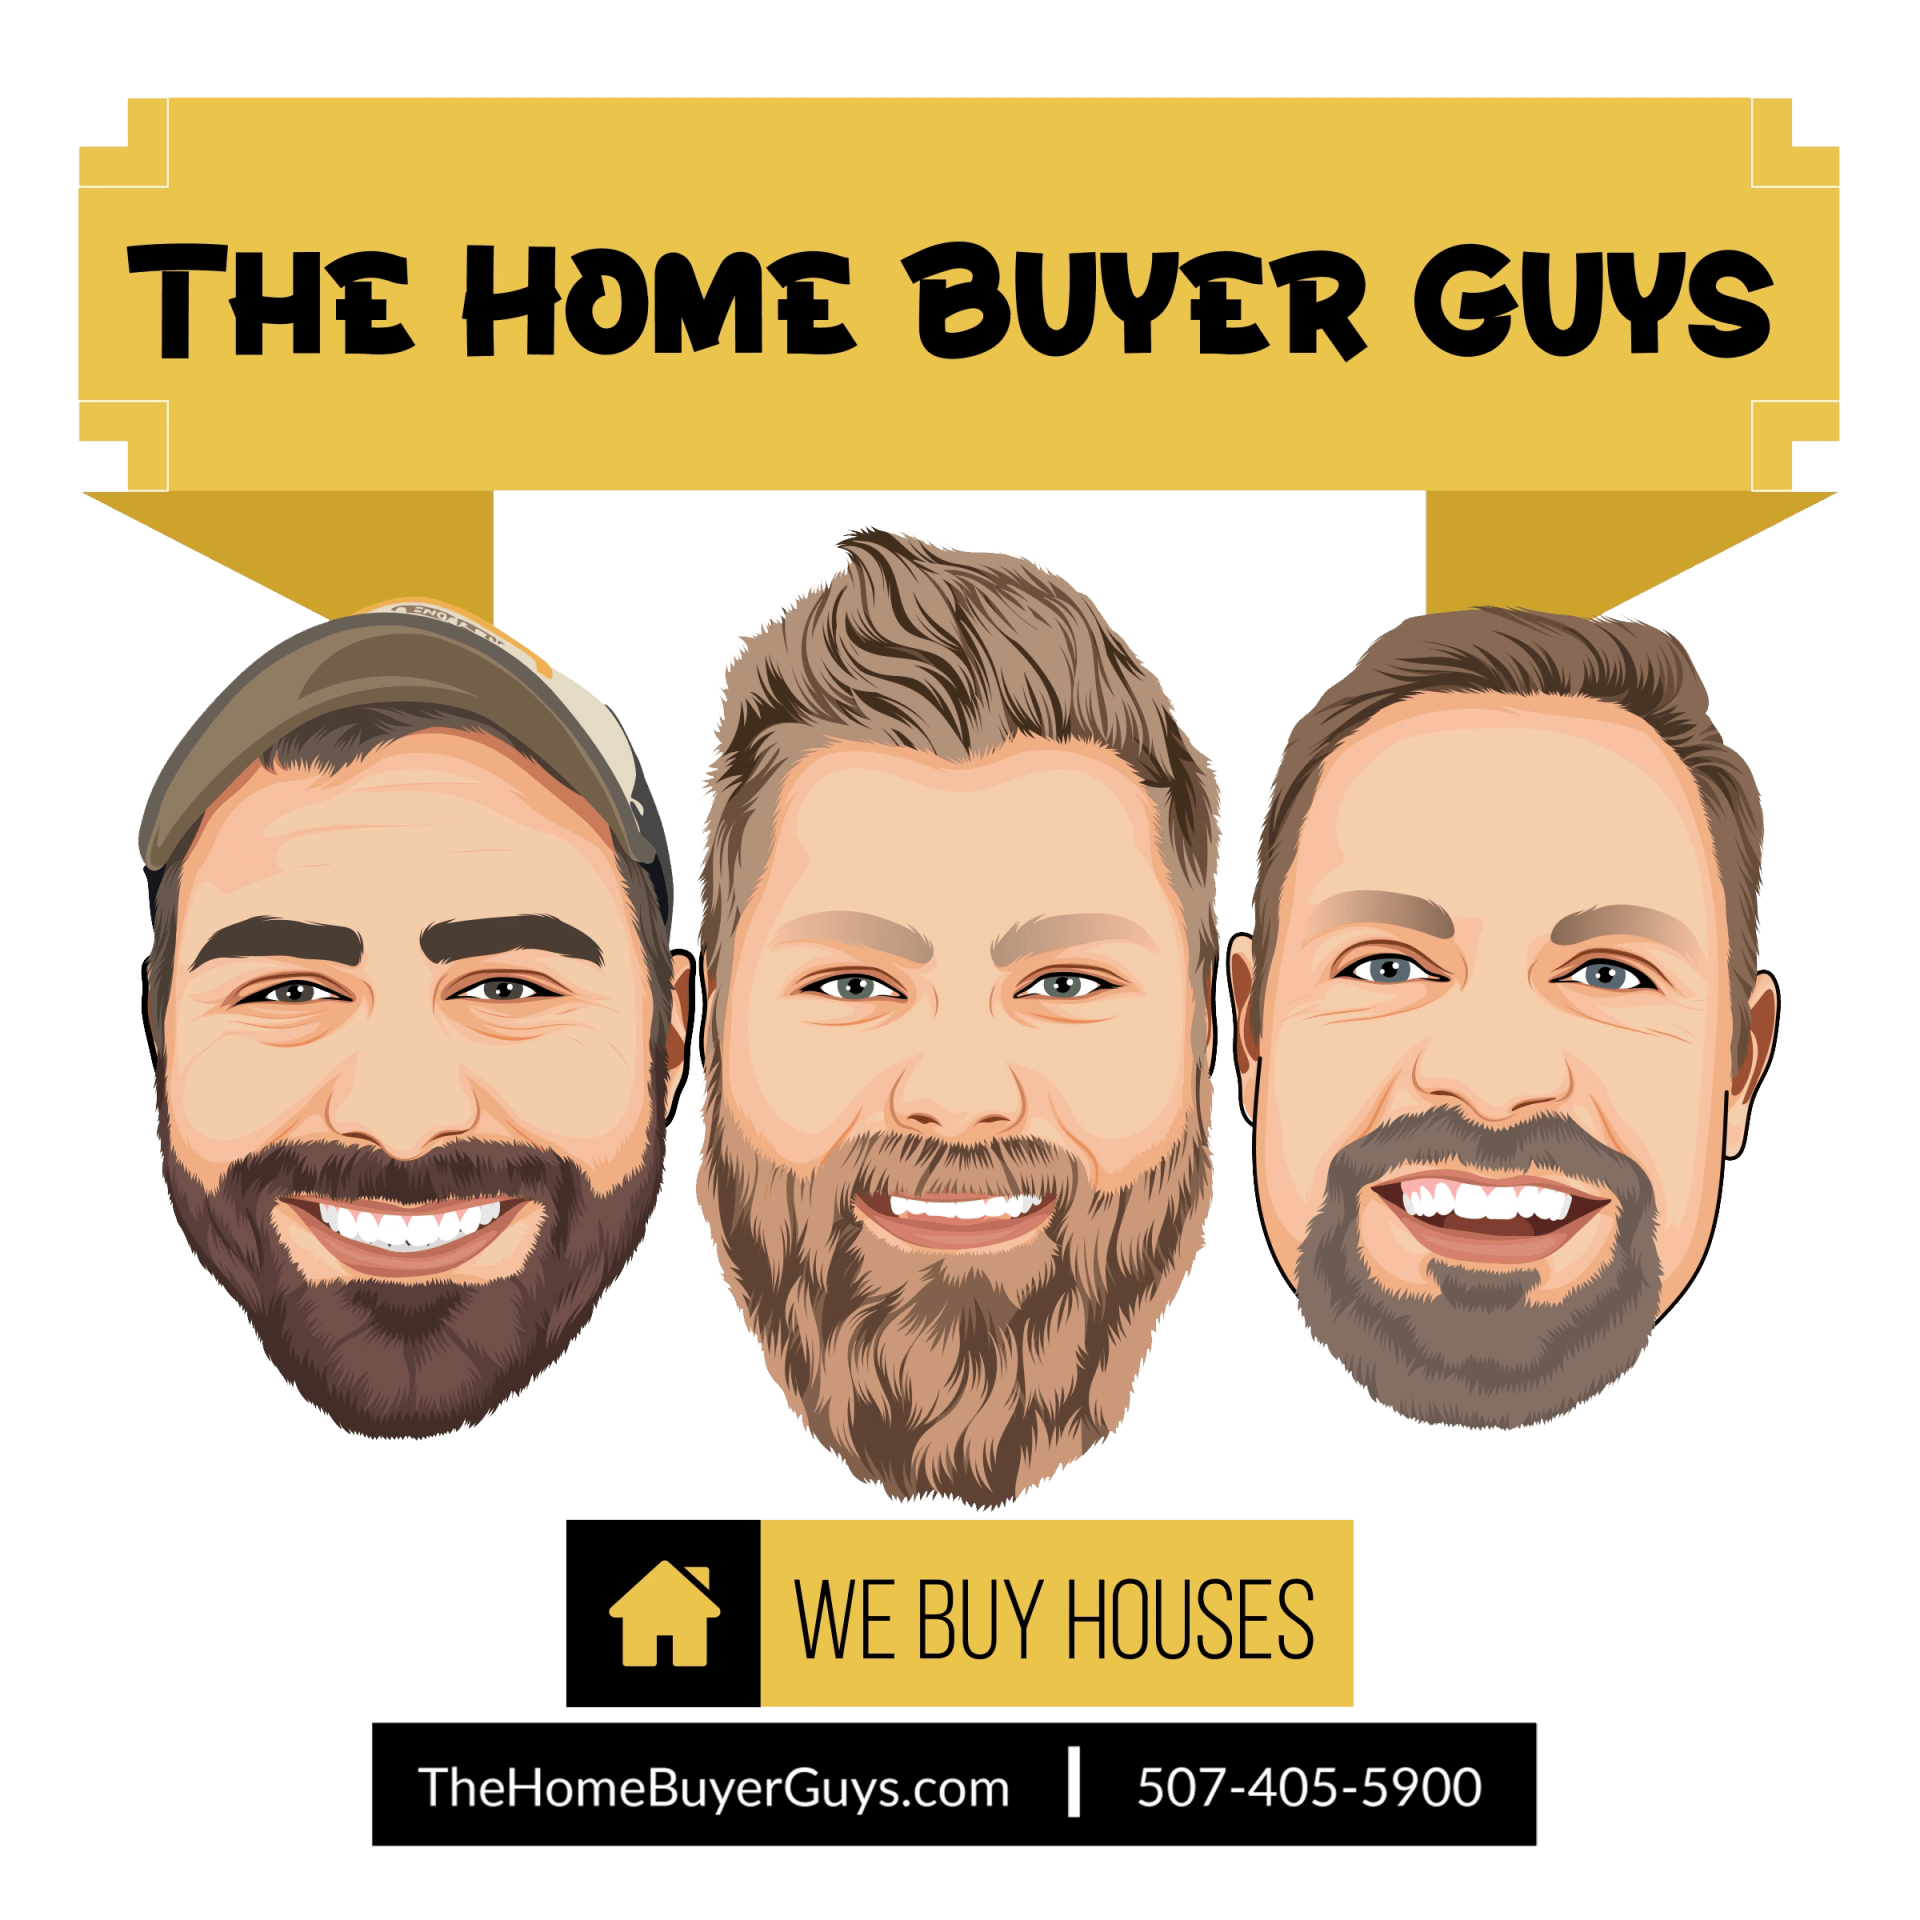 The Home Buyer Guys